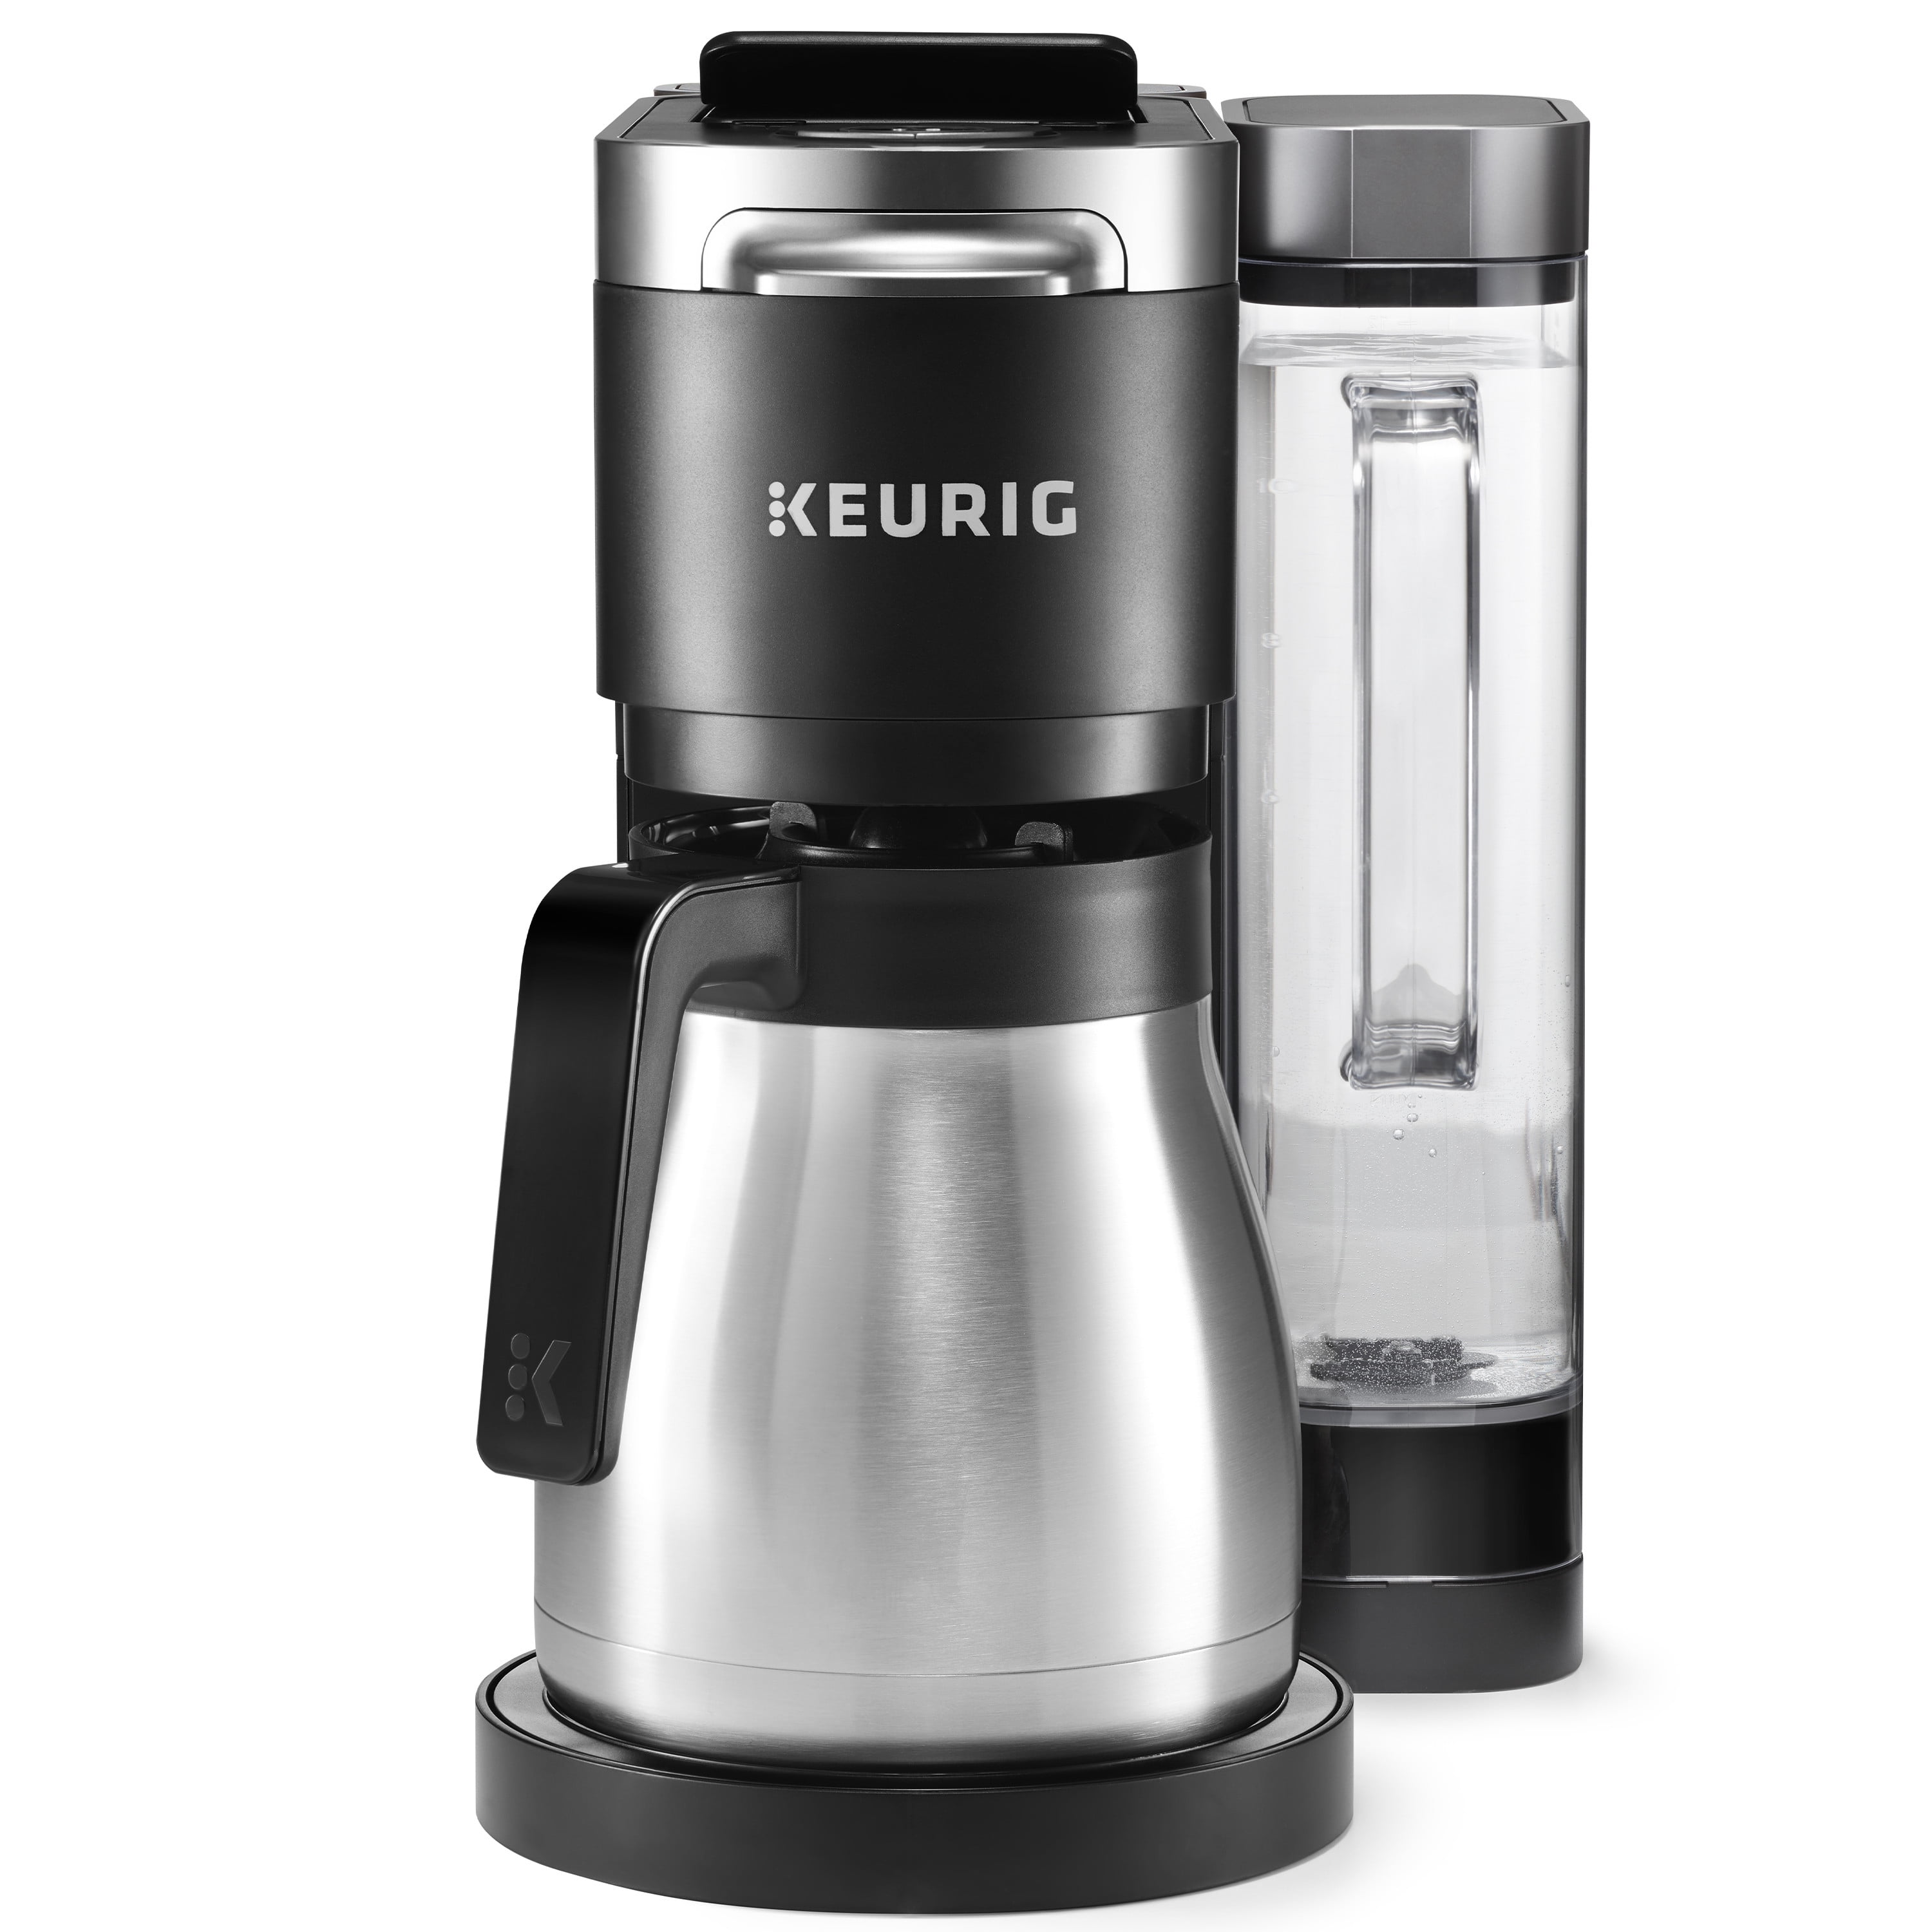 12-CUP Glass Replacement Coffee Carafe ONLY for KEURIG K-DUO Single Server  & Carafe Coffee Maker | NOT the K-Duo Essentials Model